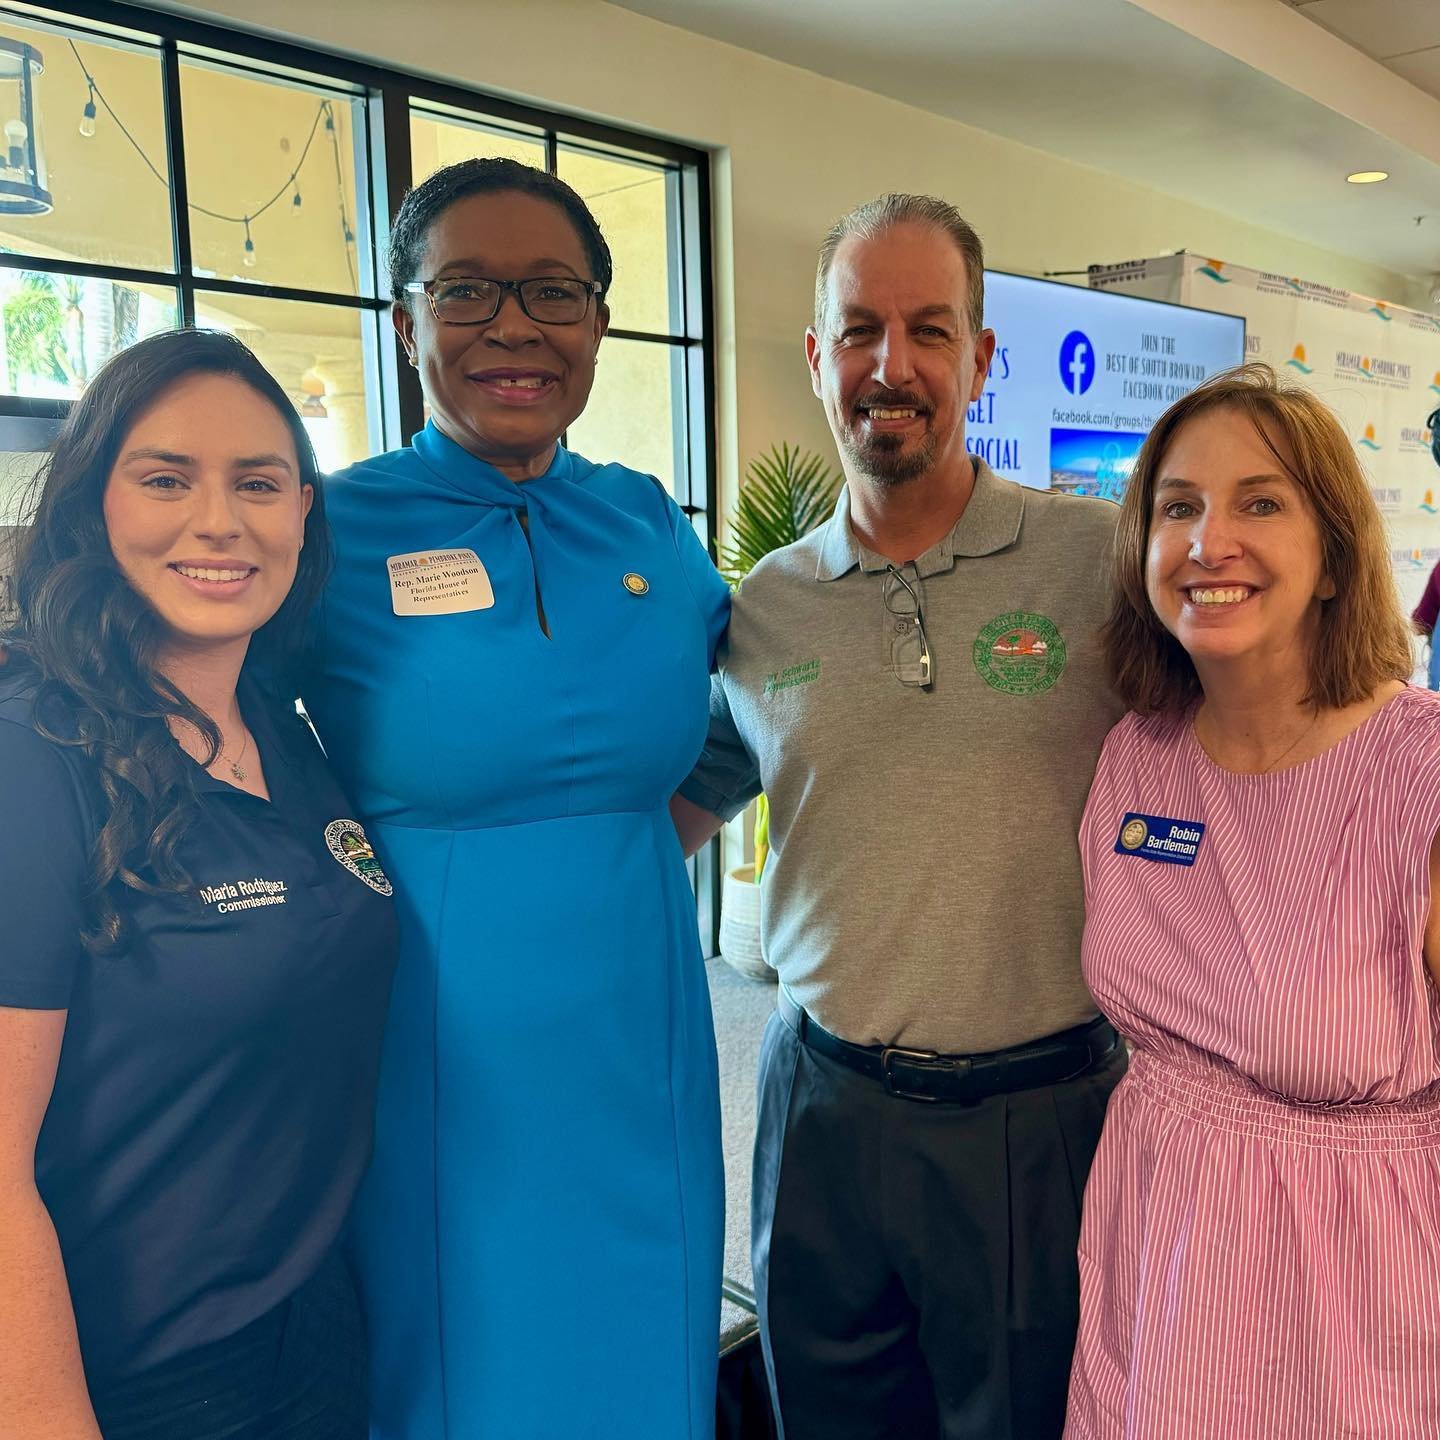 From AM to PM 🕝 Today we started the day out with a great @miramarpembrokepineschamber Breakfast and ended it with an informative Town Hall hosted by @mayor_angelocastillo

Next Town Hall Meeting: 

Thursday, May 16, 2024 at 6:30PM
PINES VILLAGE COM